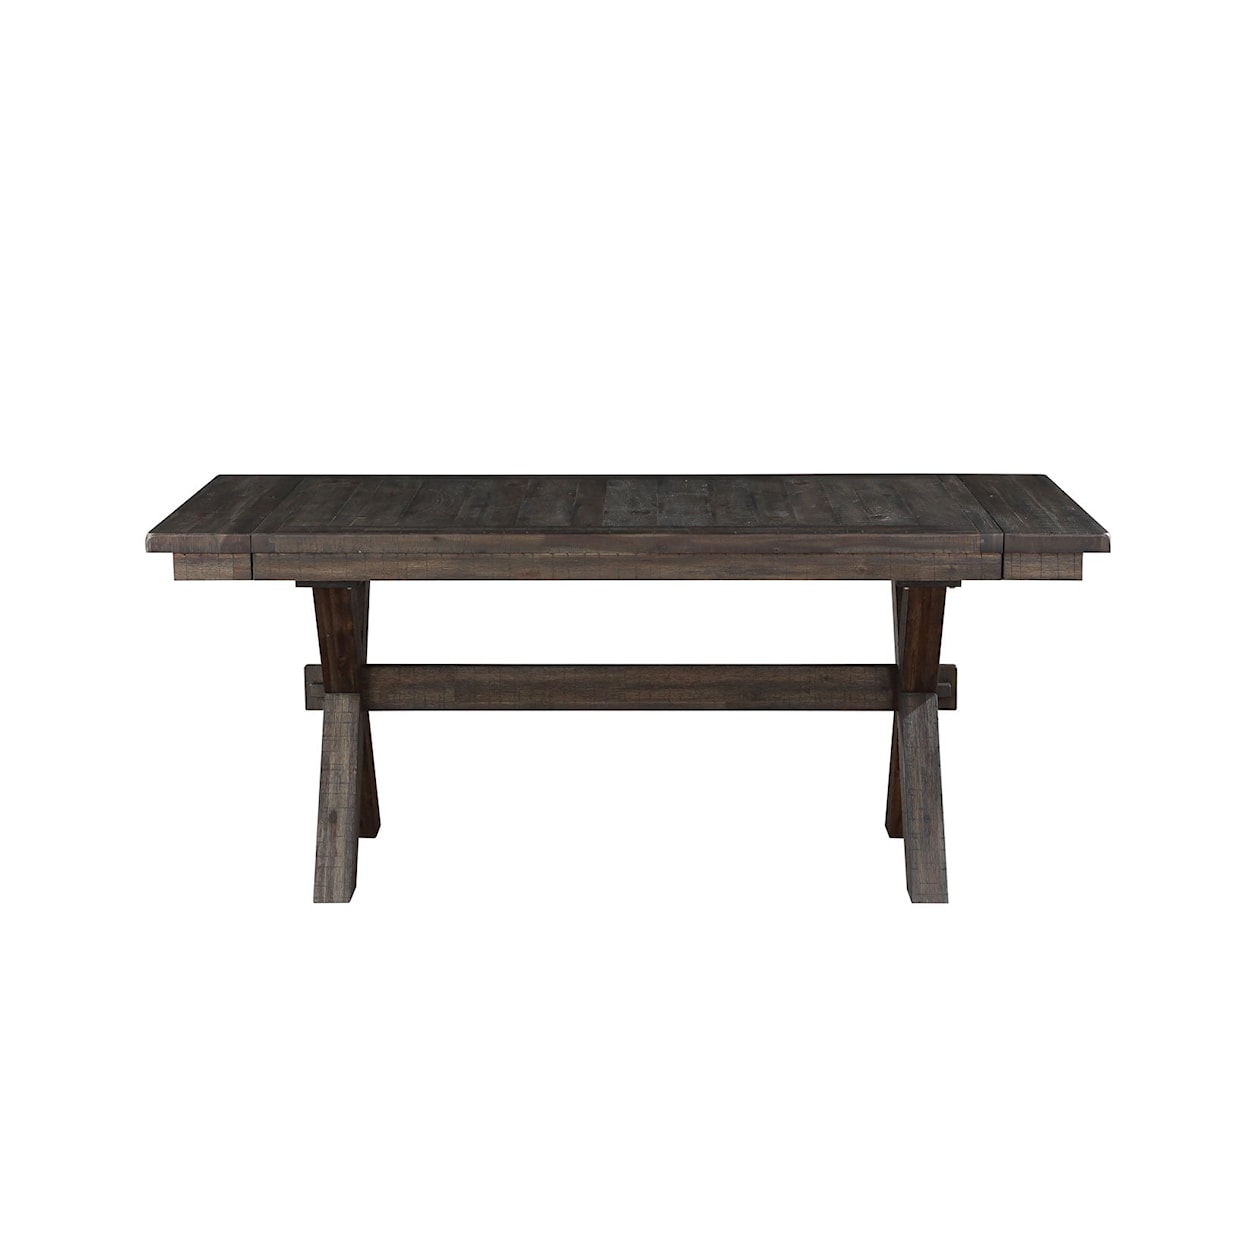 Prime Riverdale Dining Table